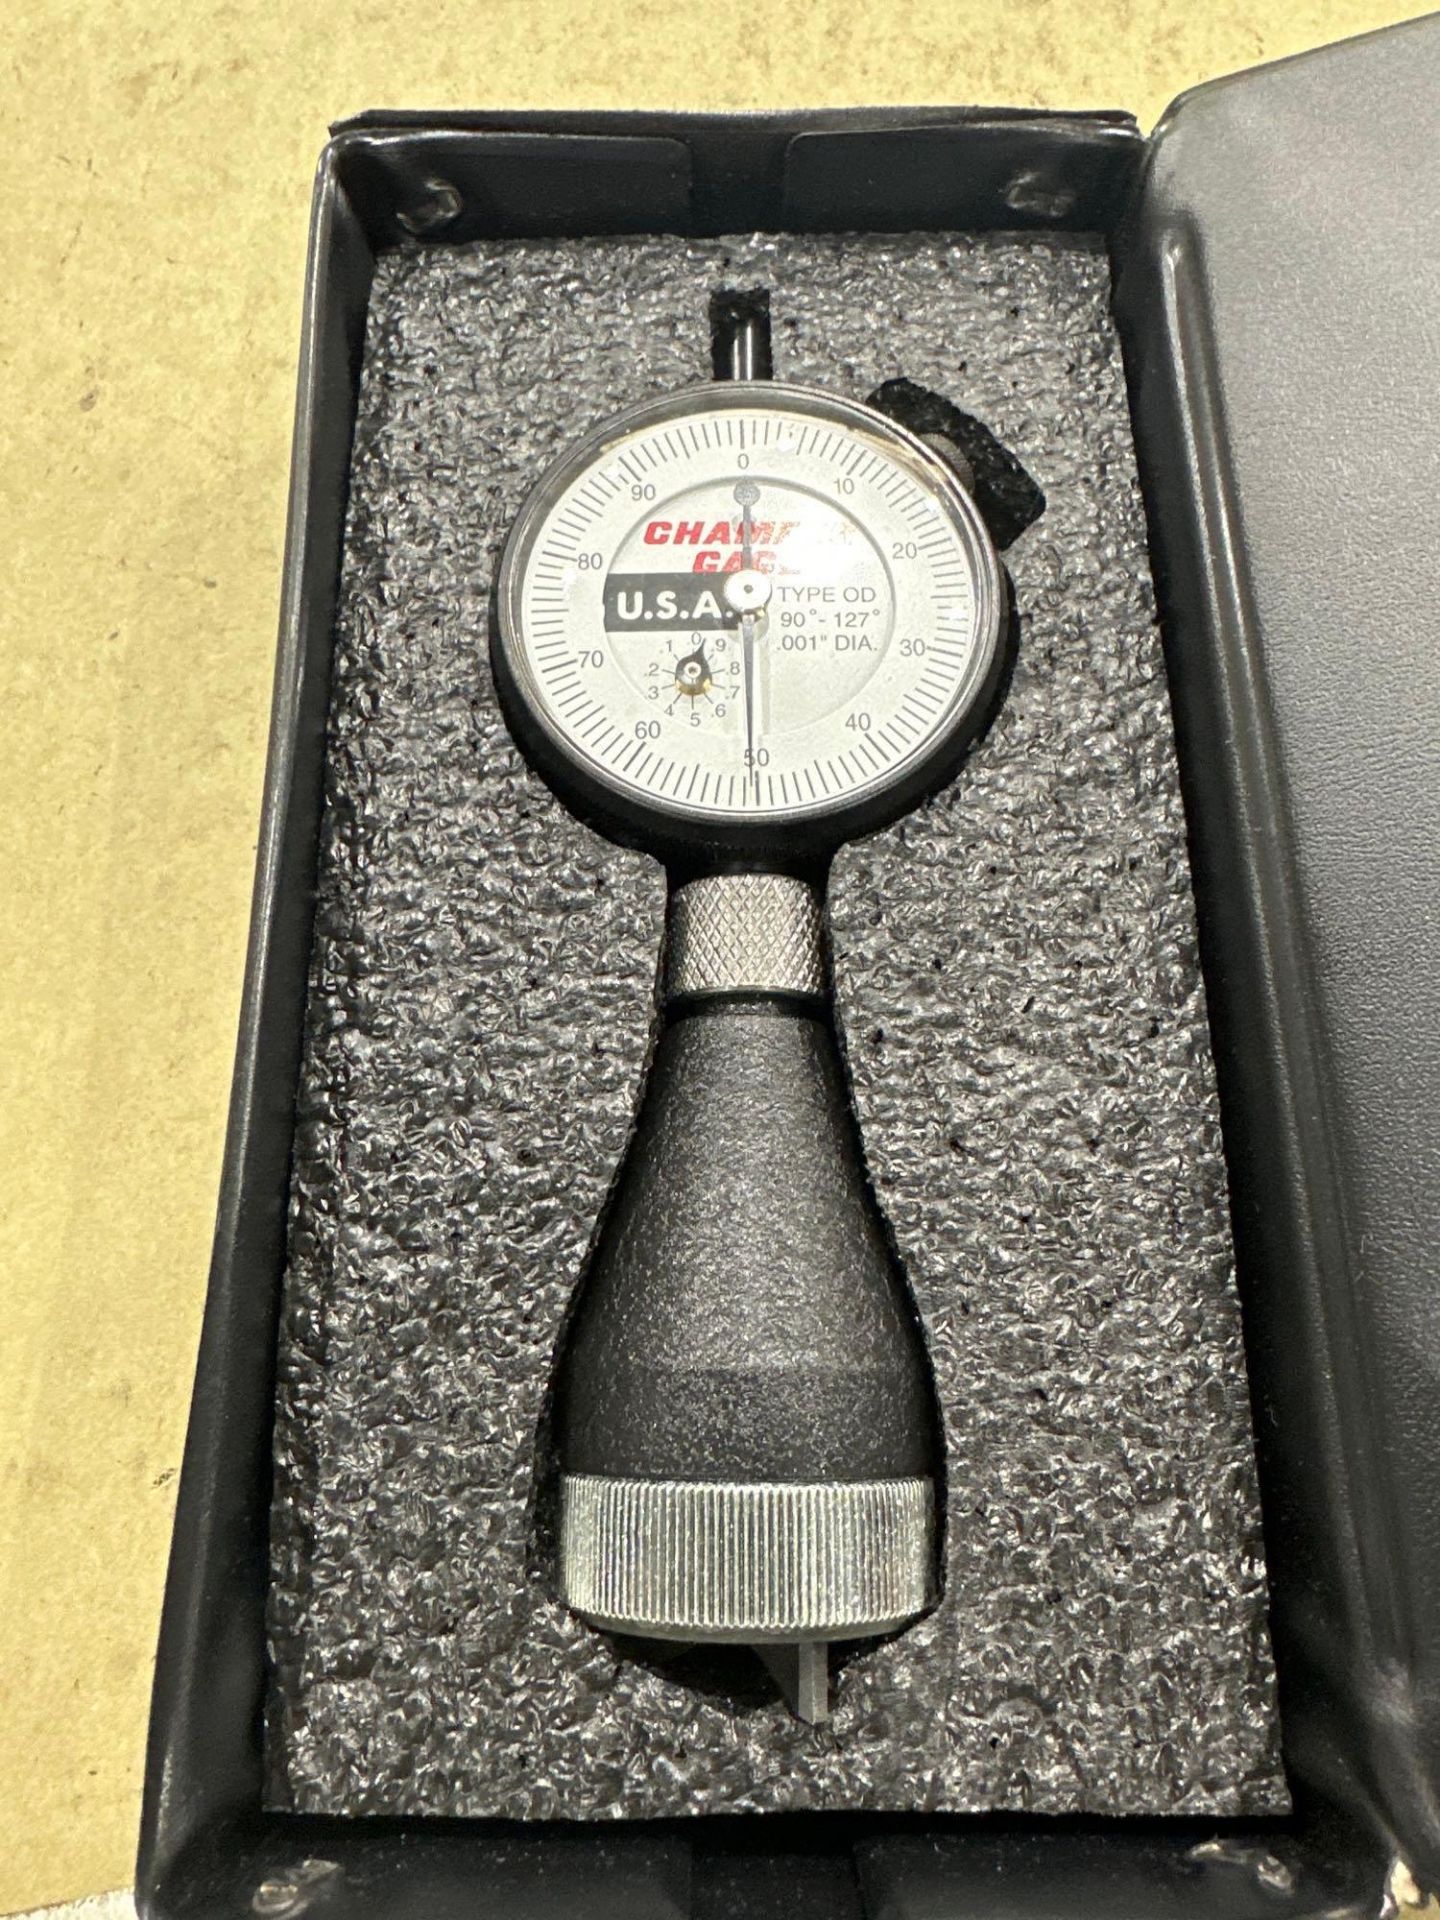 External Dial Chamfer Gage Type OD, 90-127 degrees, .001” dia.   See photo. - Image 2 of 3